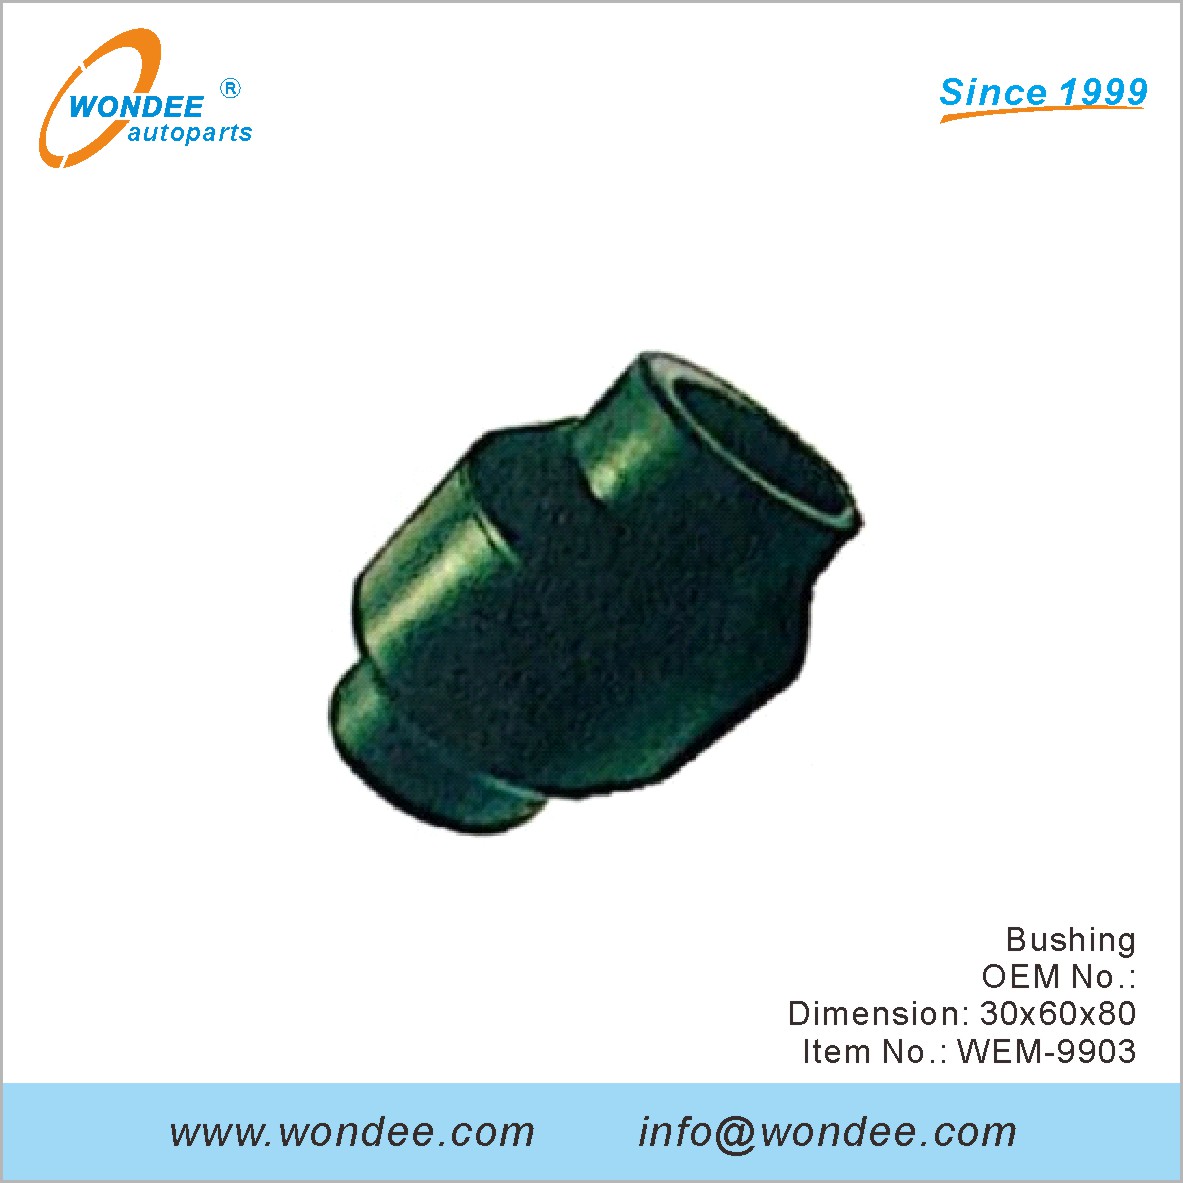 Bushing OEM for engine mouting from WONDEE (3)